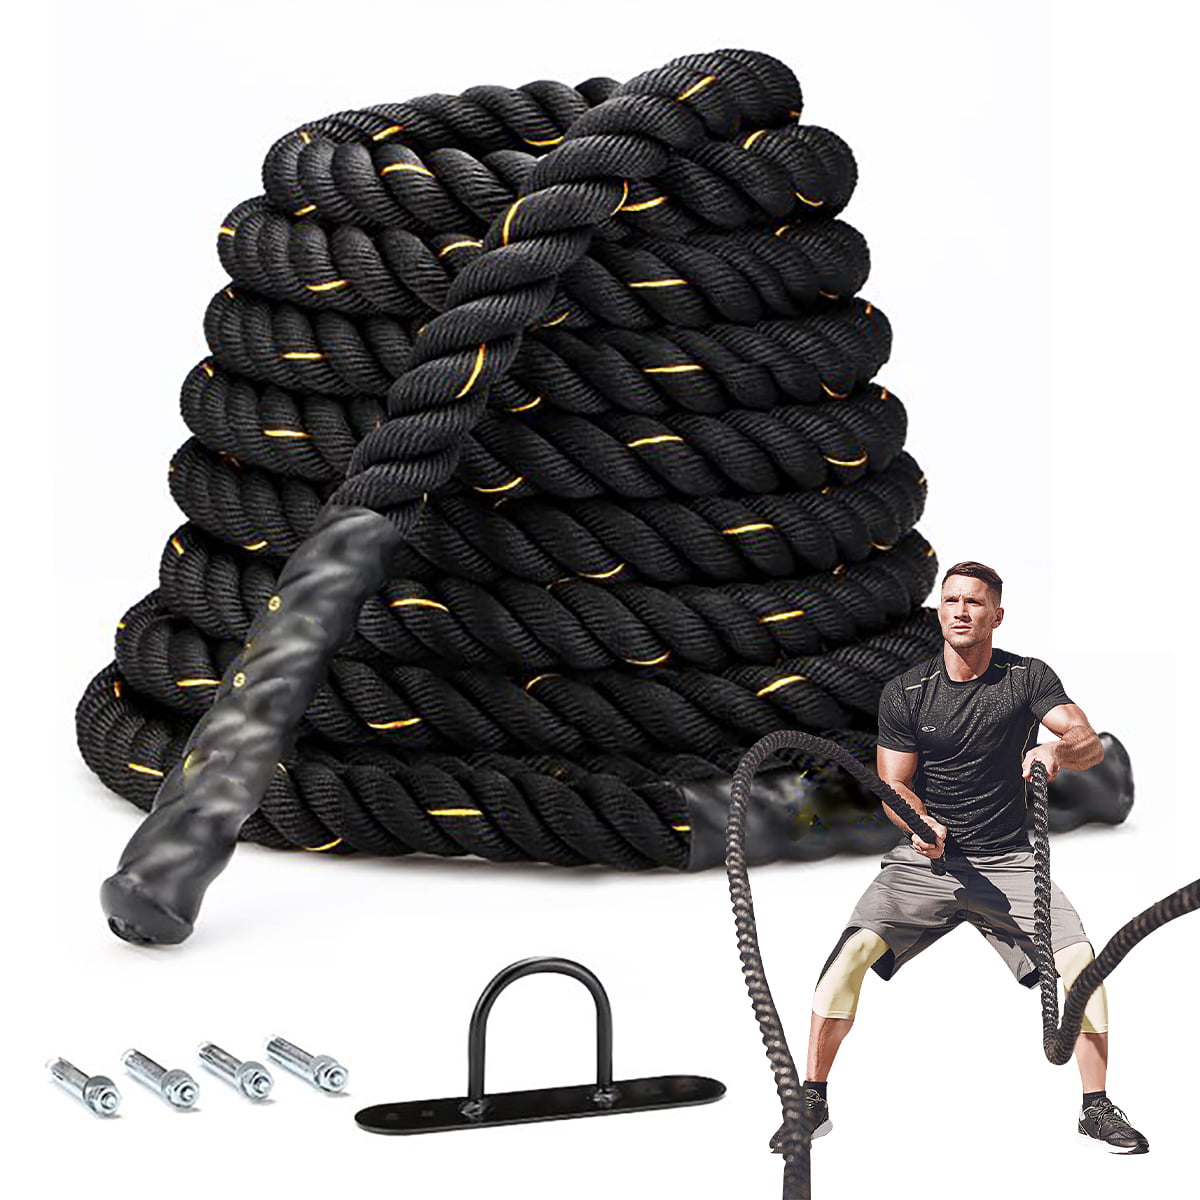 Strap Muscle Workout Fitness Battle Rope Gym At Home Anchor Equipment Sport Tool 